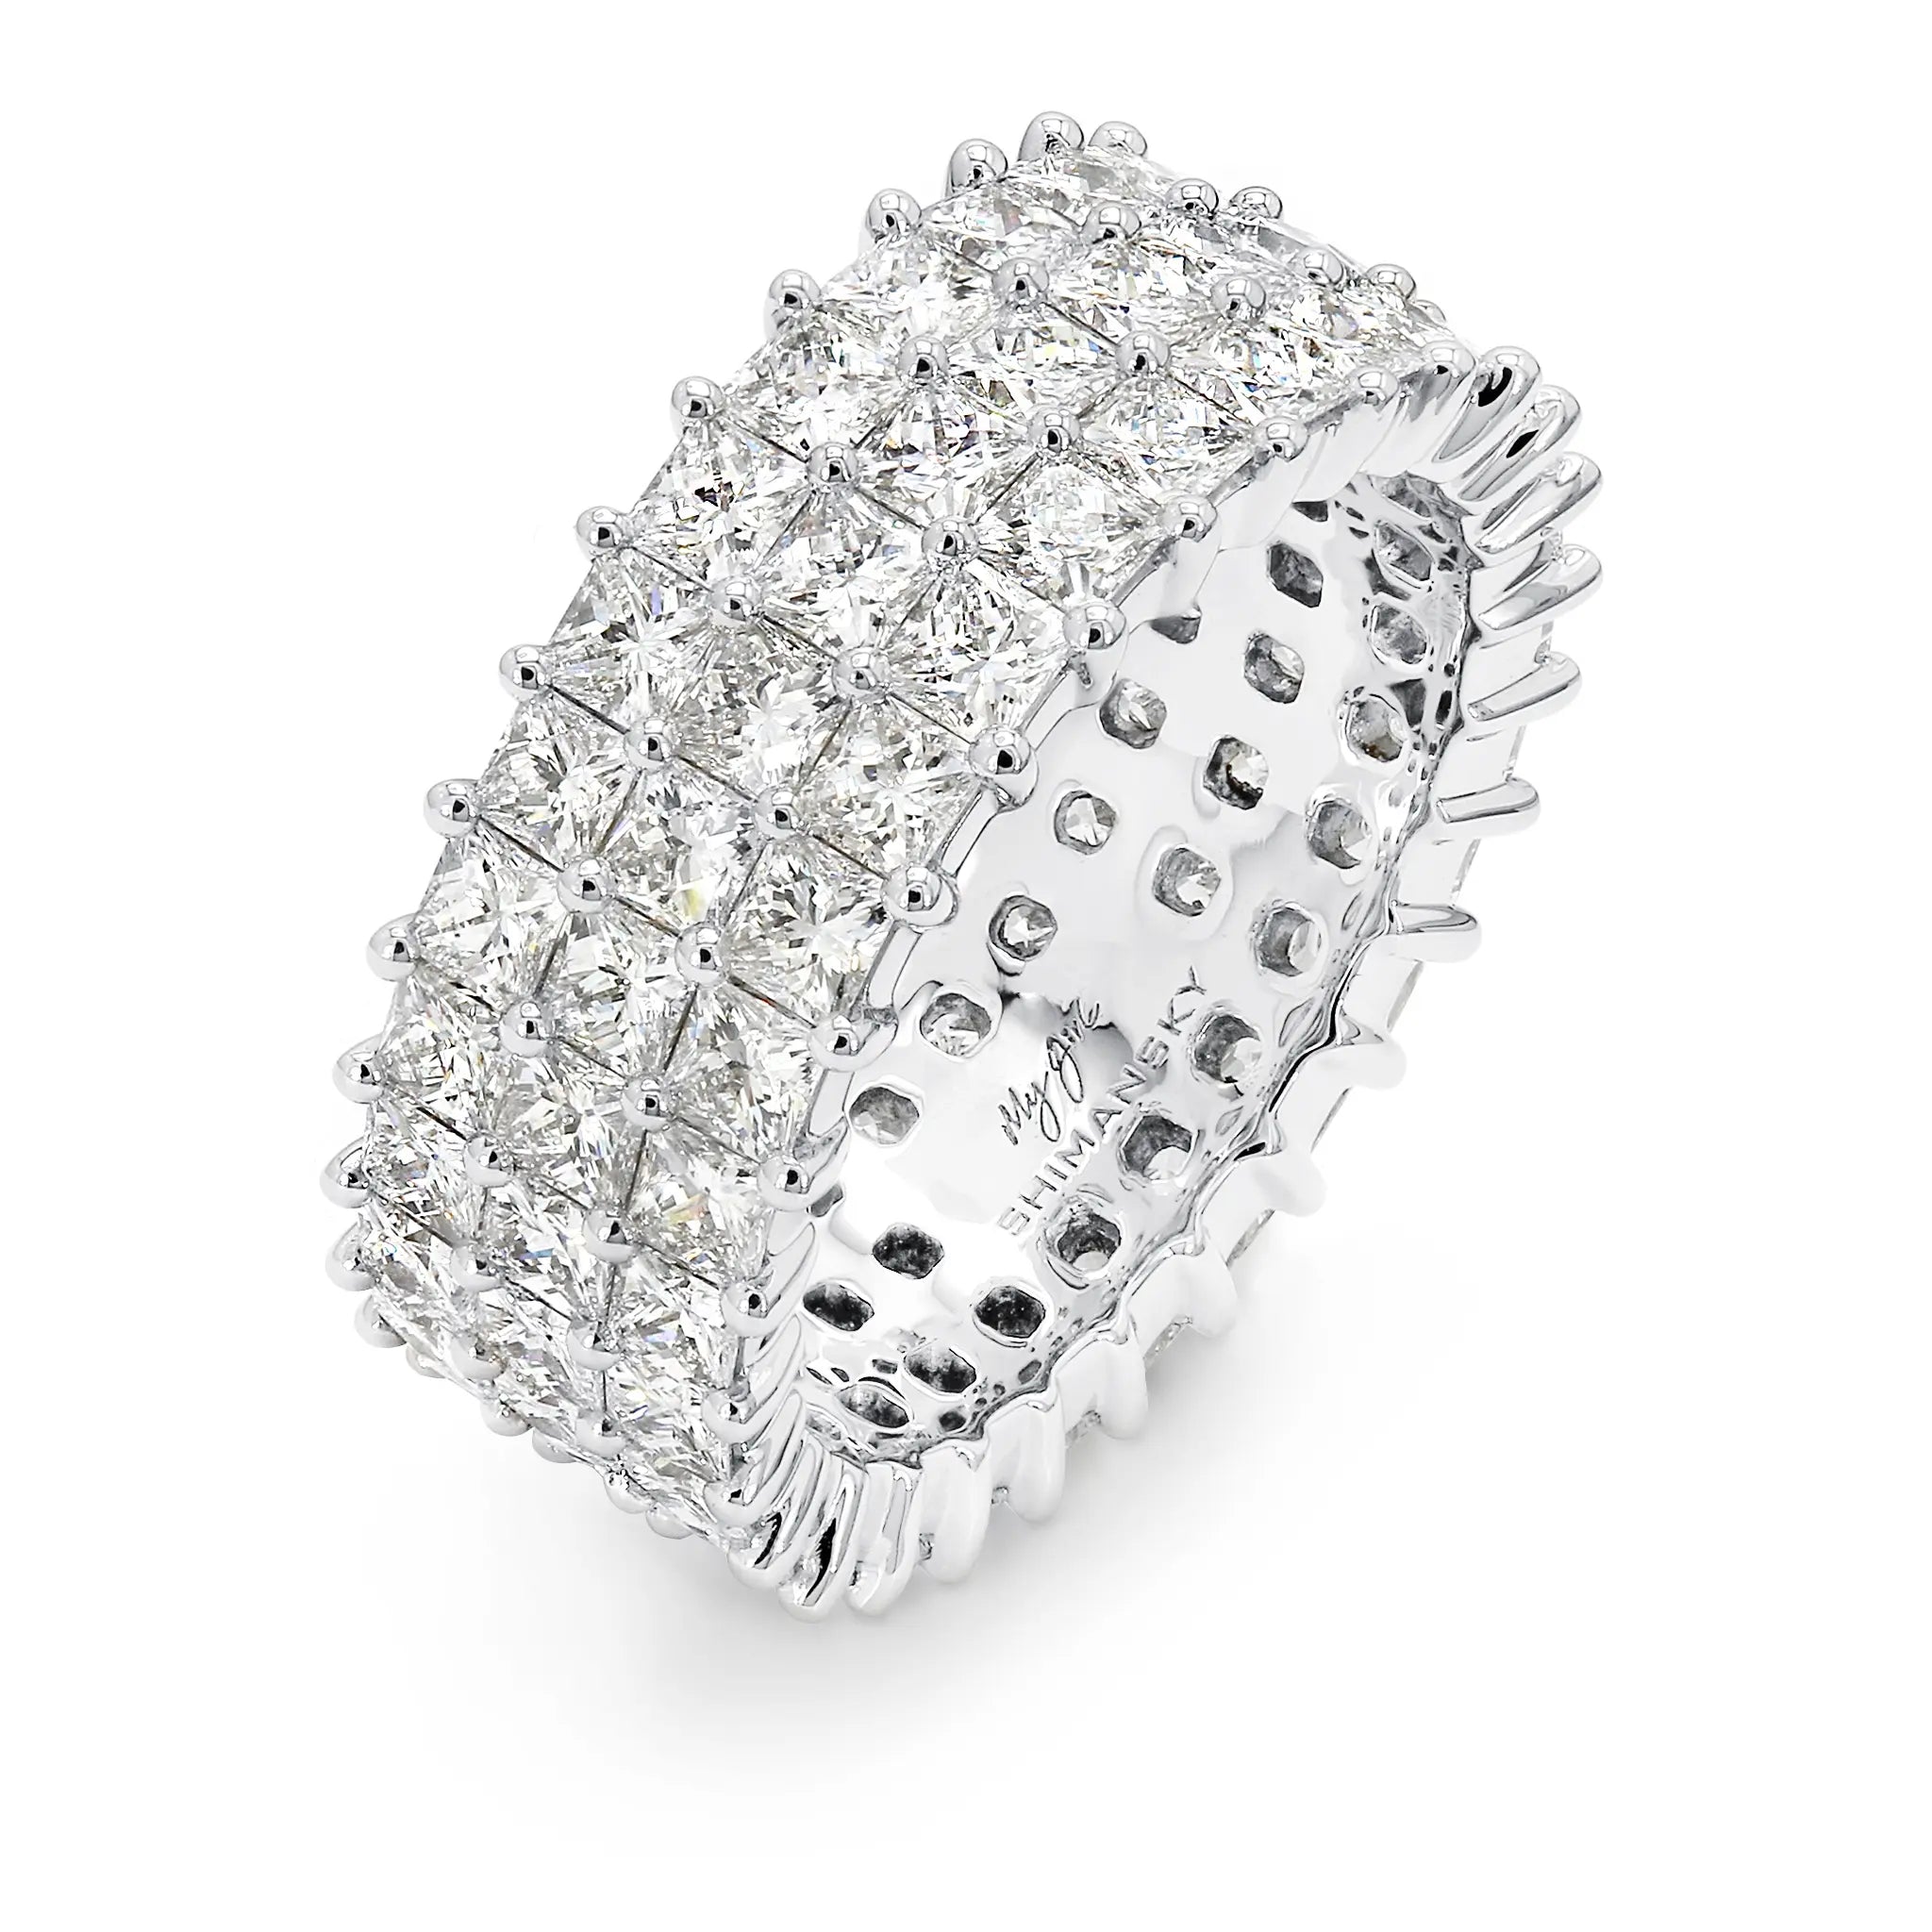 Shimansky - My Girl Claw set 3 Row Full Eternity Diamond Ring 5.00ct Crafted in 18K White Gold